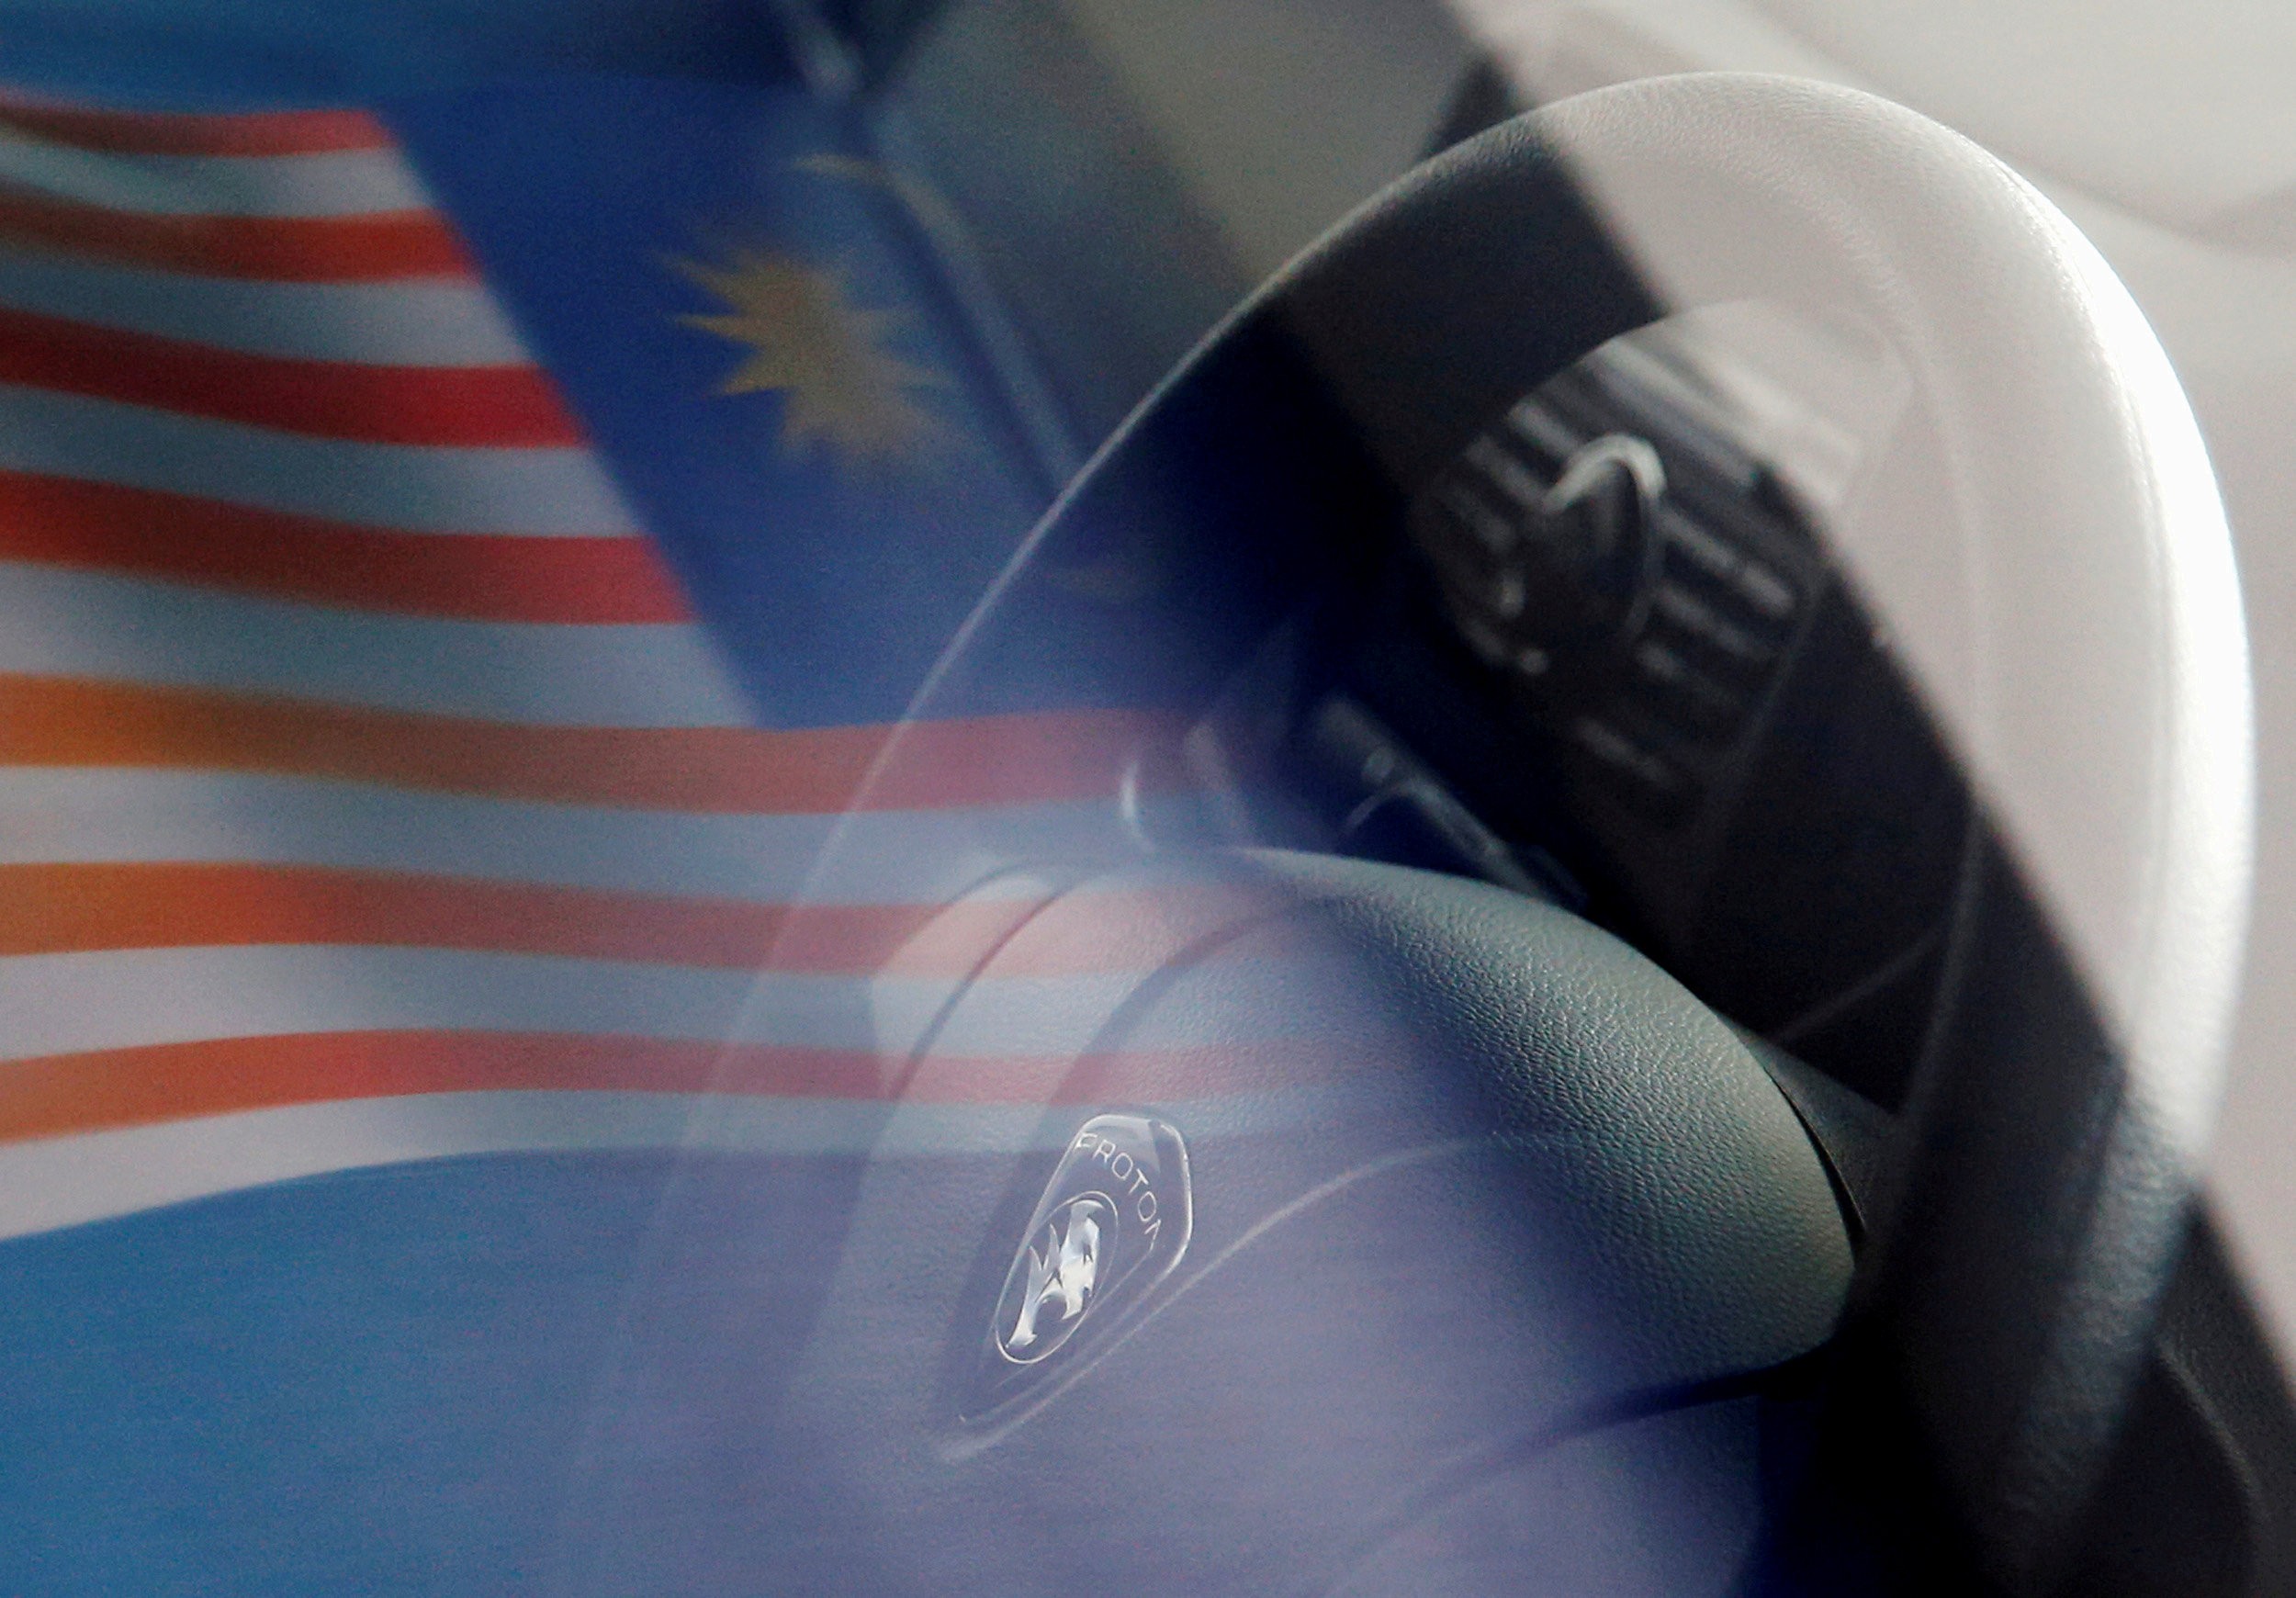 The prime minister’s plans to revive Malaysia’s national car project is about more than just an automobile: it is about face, and one man’s enduring obsession with legacy